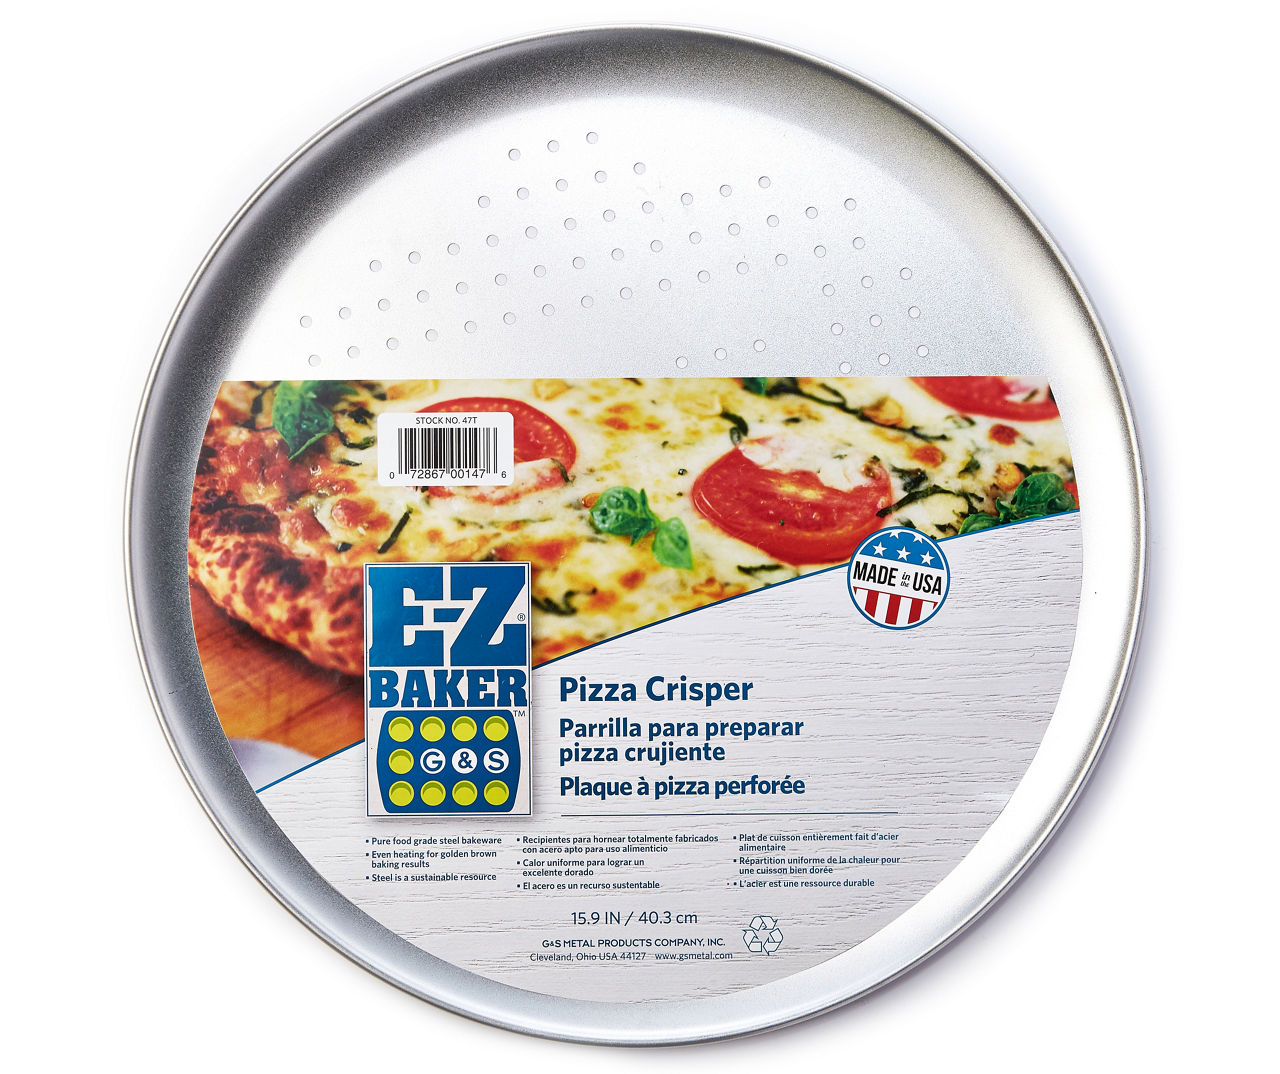 Uncoated Pizza Baking Pan American-Made EZ Baker 16” Pizza Pan Easy to Clean and Perfect Size for the Whole Family 